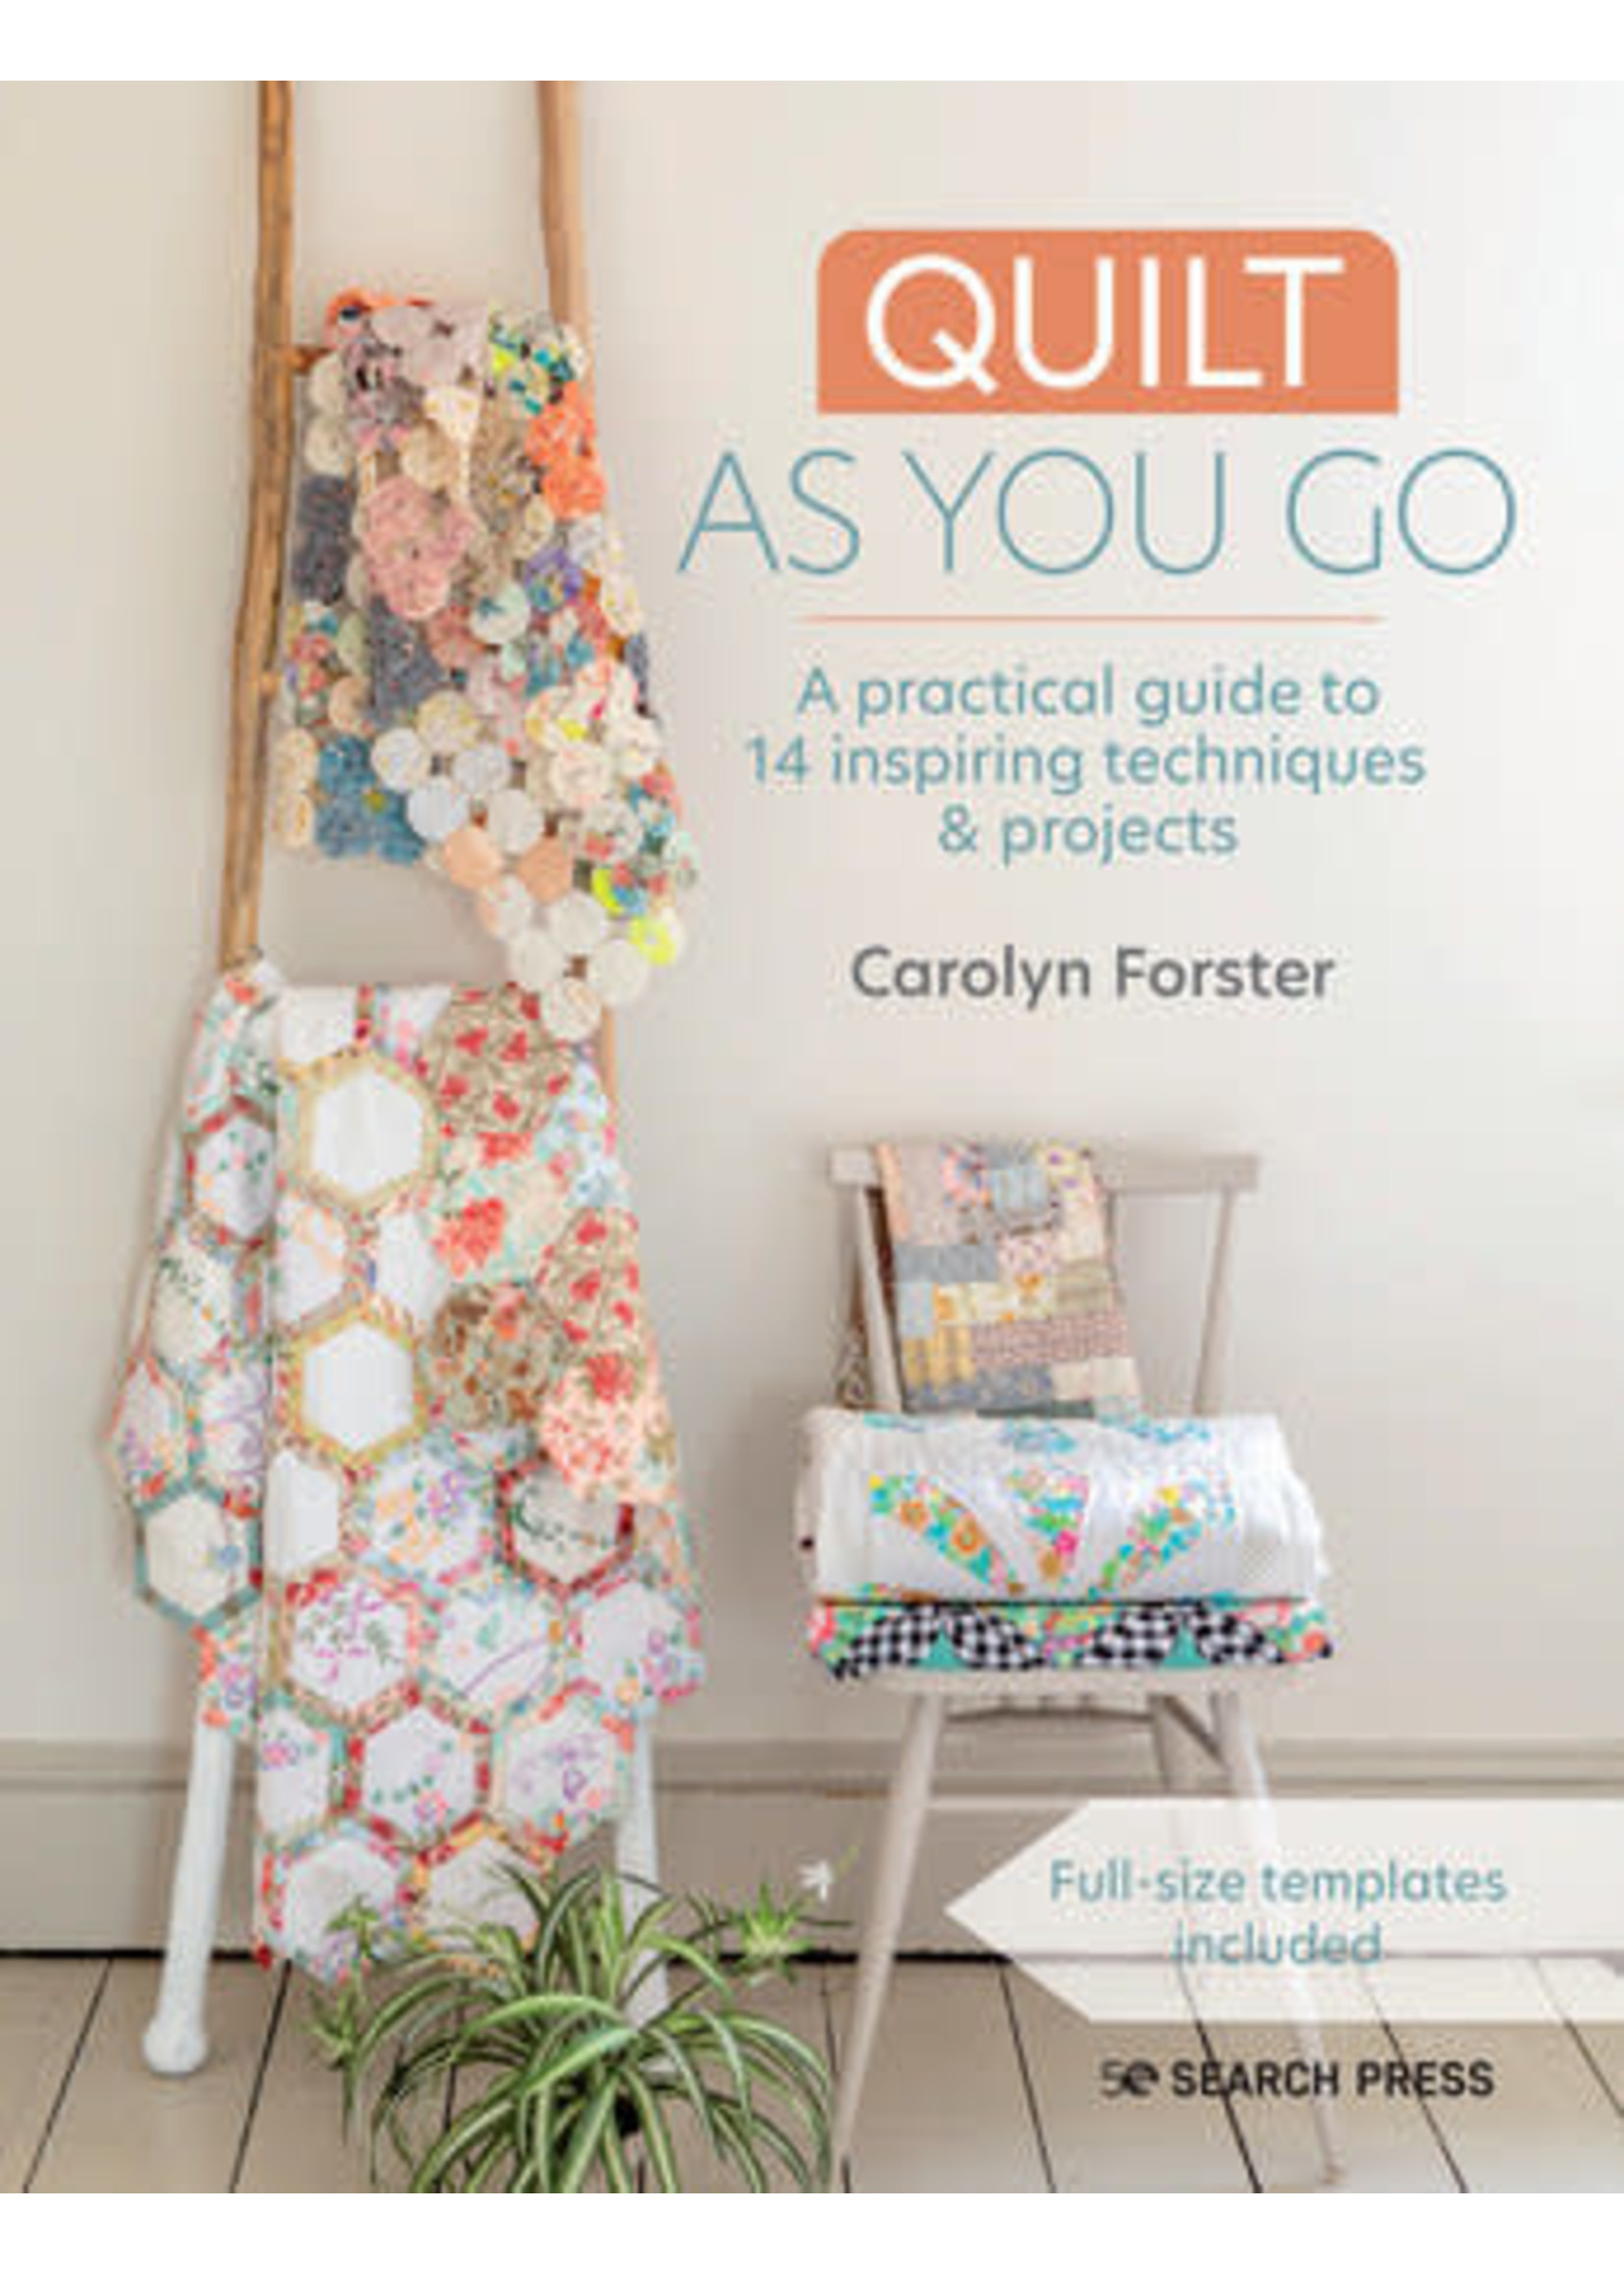 Quilt As You Go: A practical guide to 14 inspiring techniques & projects by Carolyn Forster